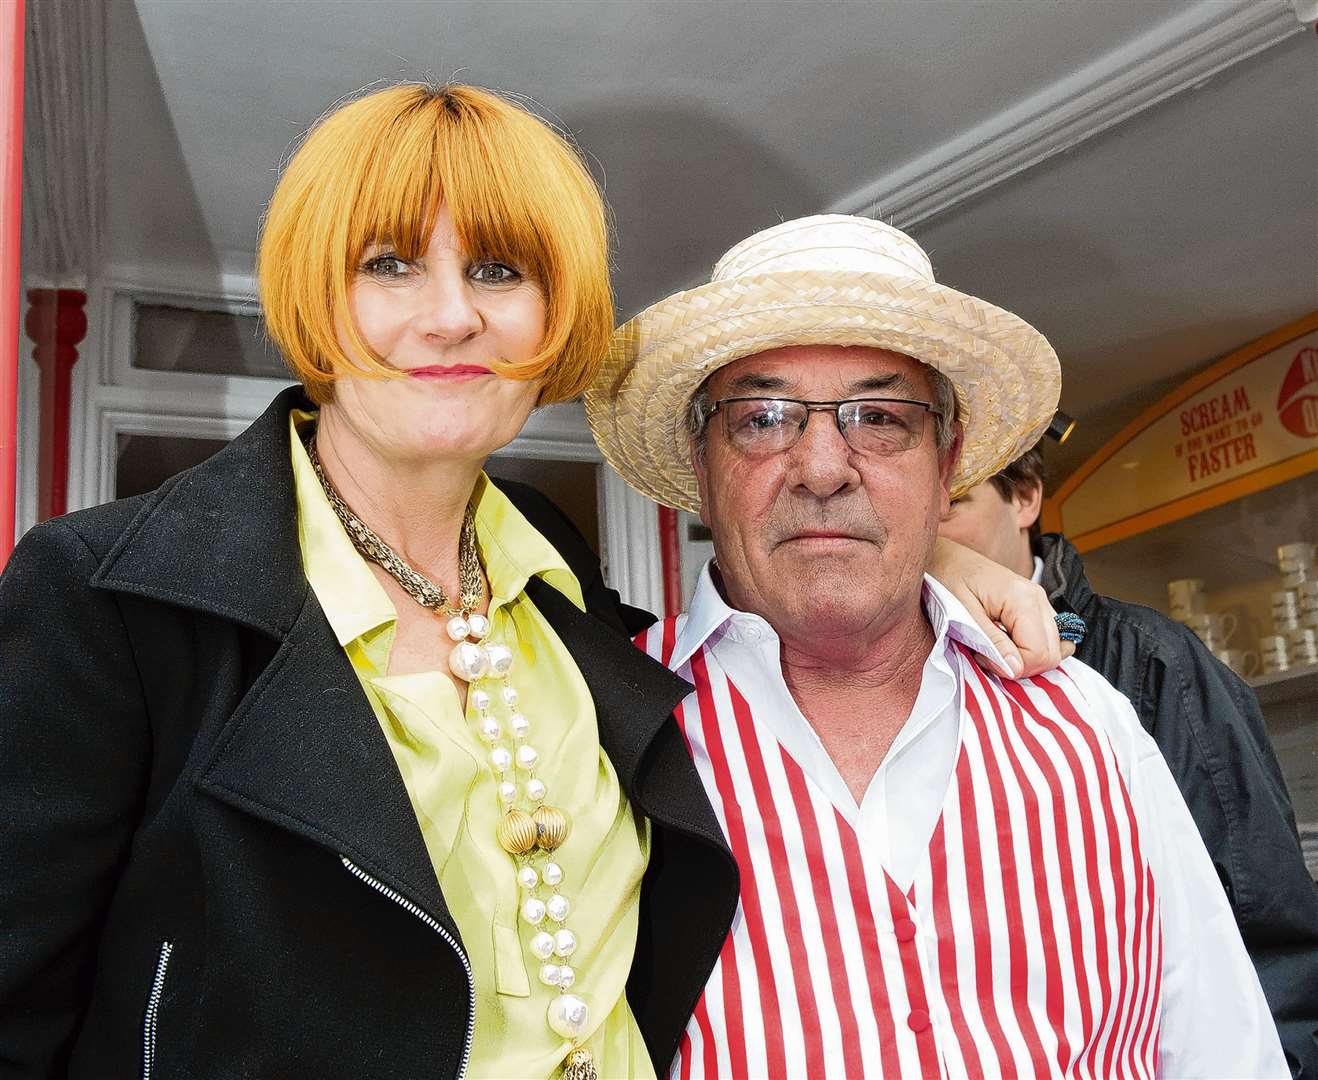 Billy Keefe, the owner of the Kiss Me Quick shop, was a firm believer in Margate’s regeneration potential and a supporter of Mary Portas’ high street revival ideas. Picture: Fiona Stapley-Harding